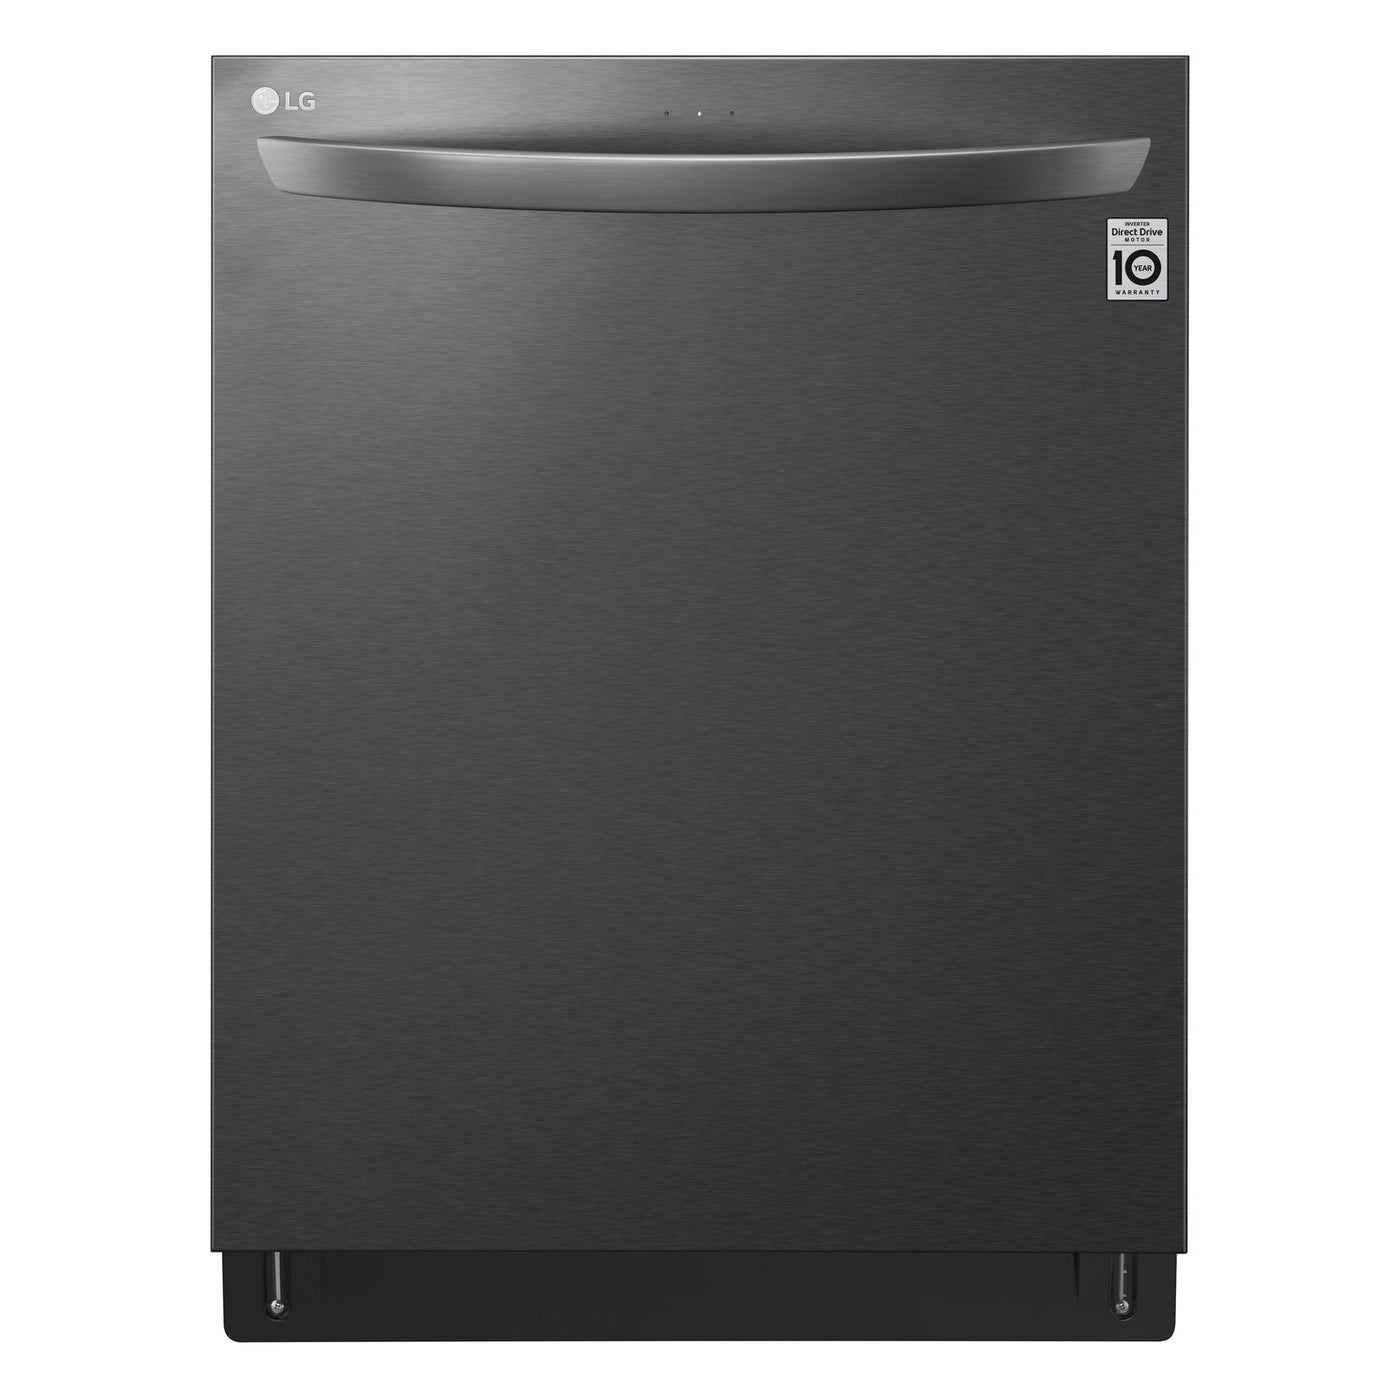 LG LDB4548ST 24 Inch Wide 15 Place Setting Energy Star